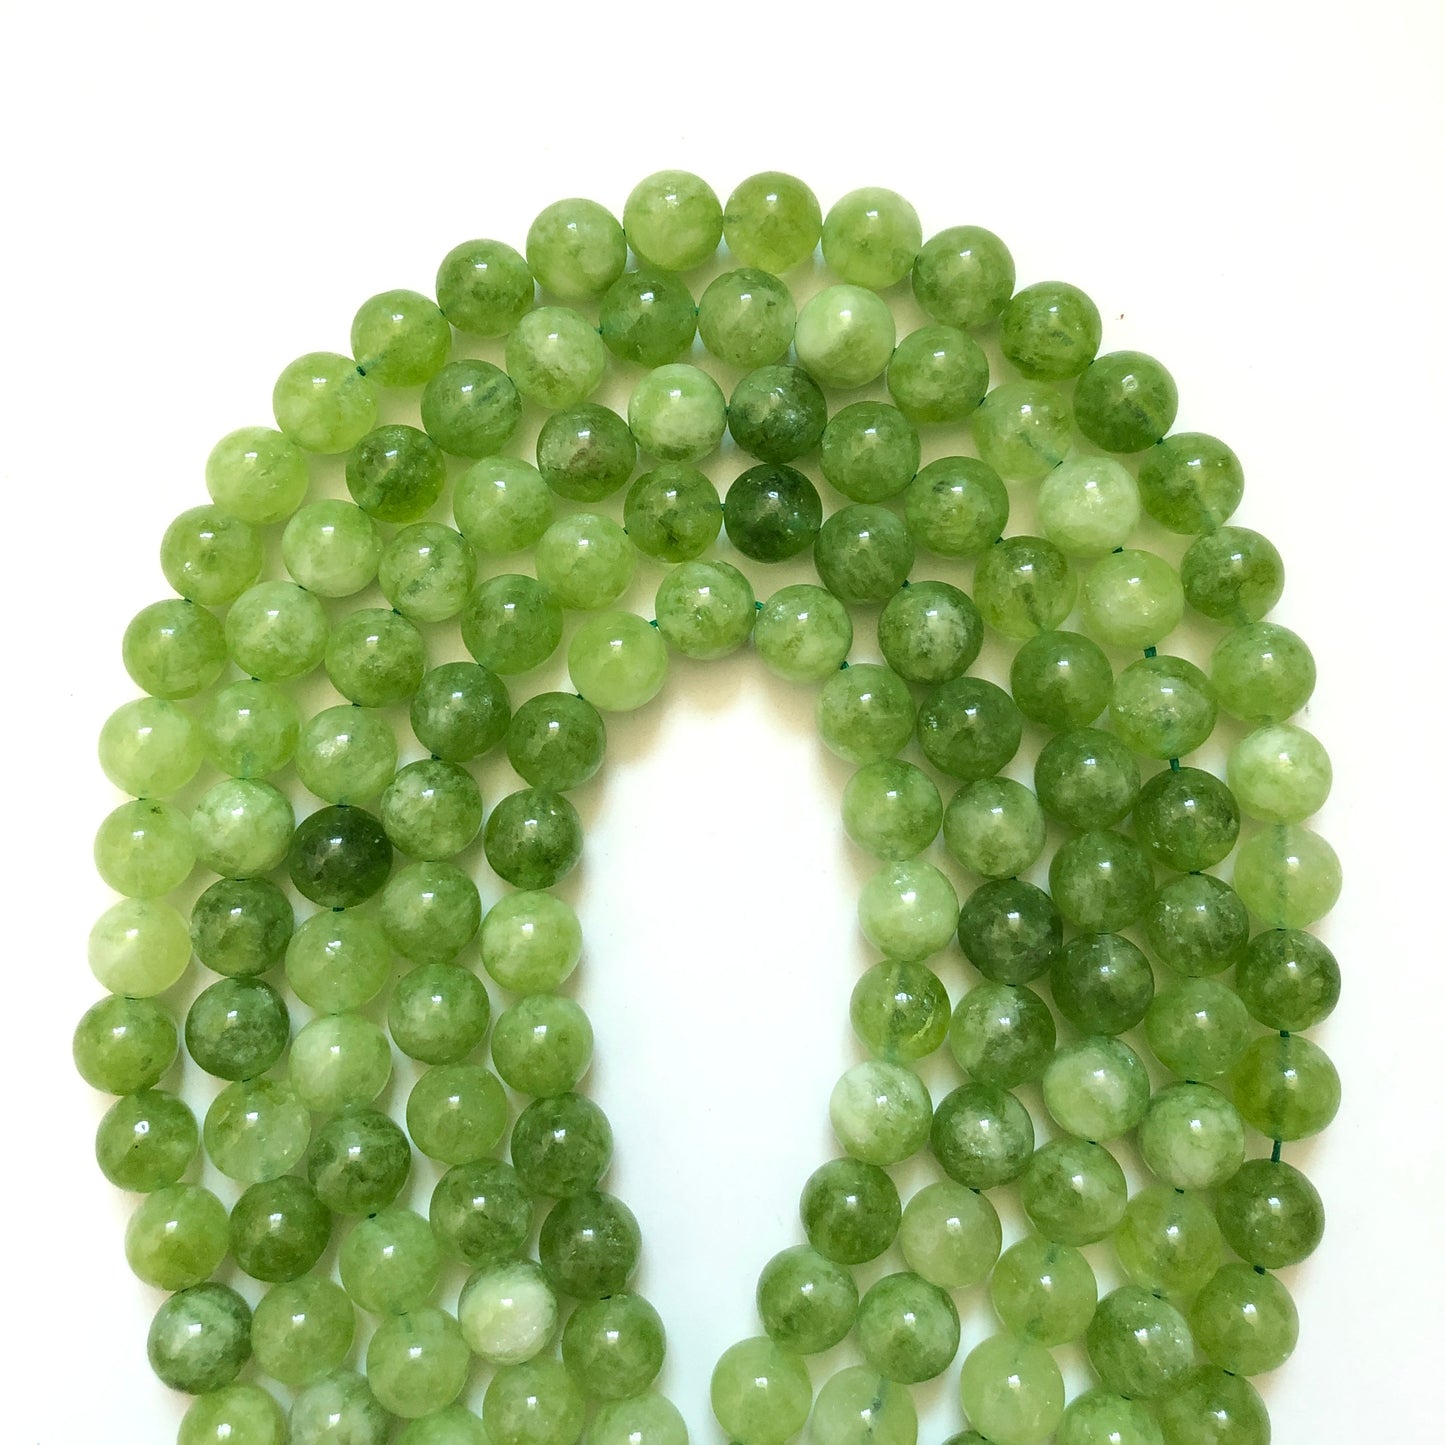 2 Strands/lot 10mm Multicolor Quartz Round Stone Beads Oliver Green Quartz Stone Beads New Beads Arrivals Other Stone Beads Charms Beads Beyond